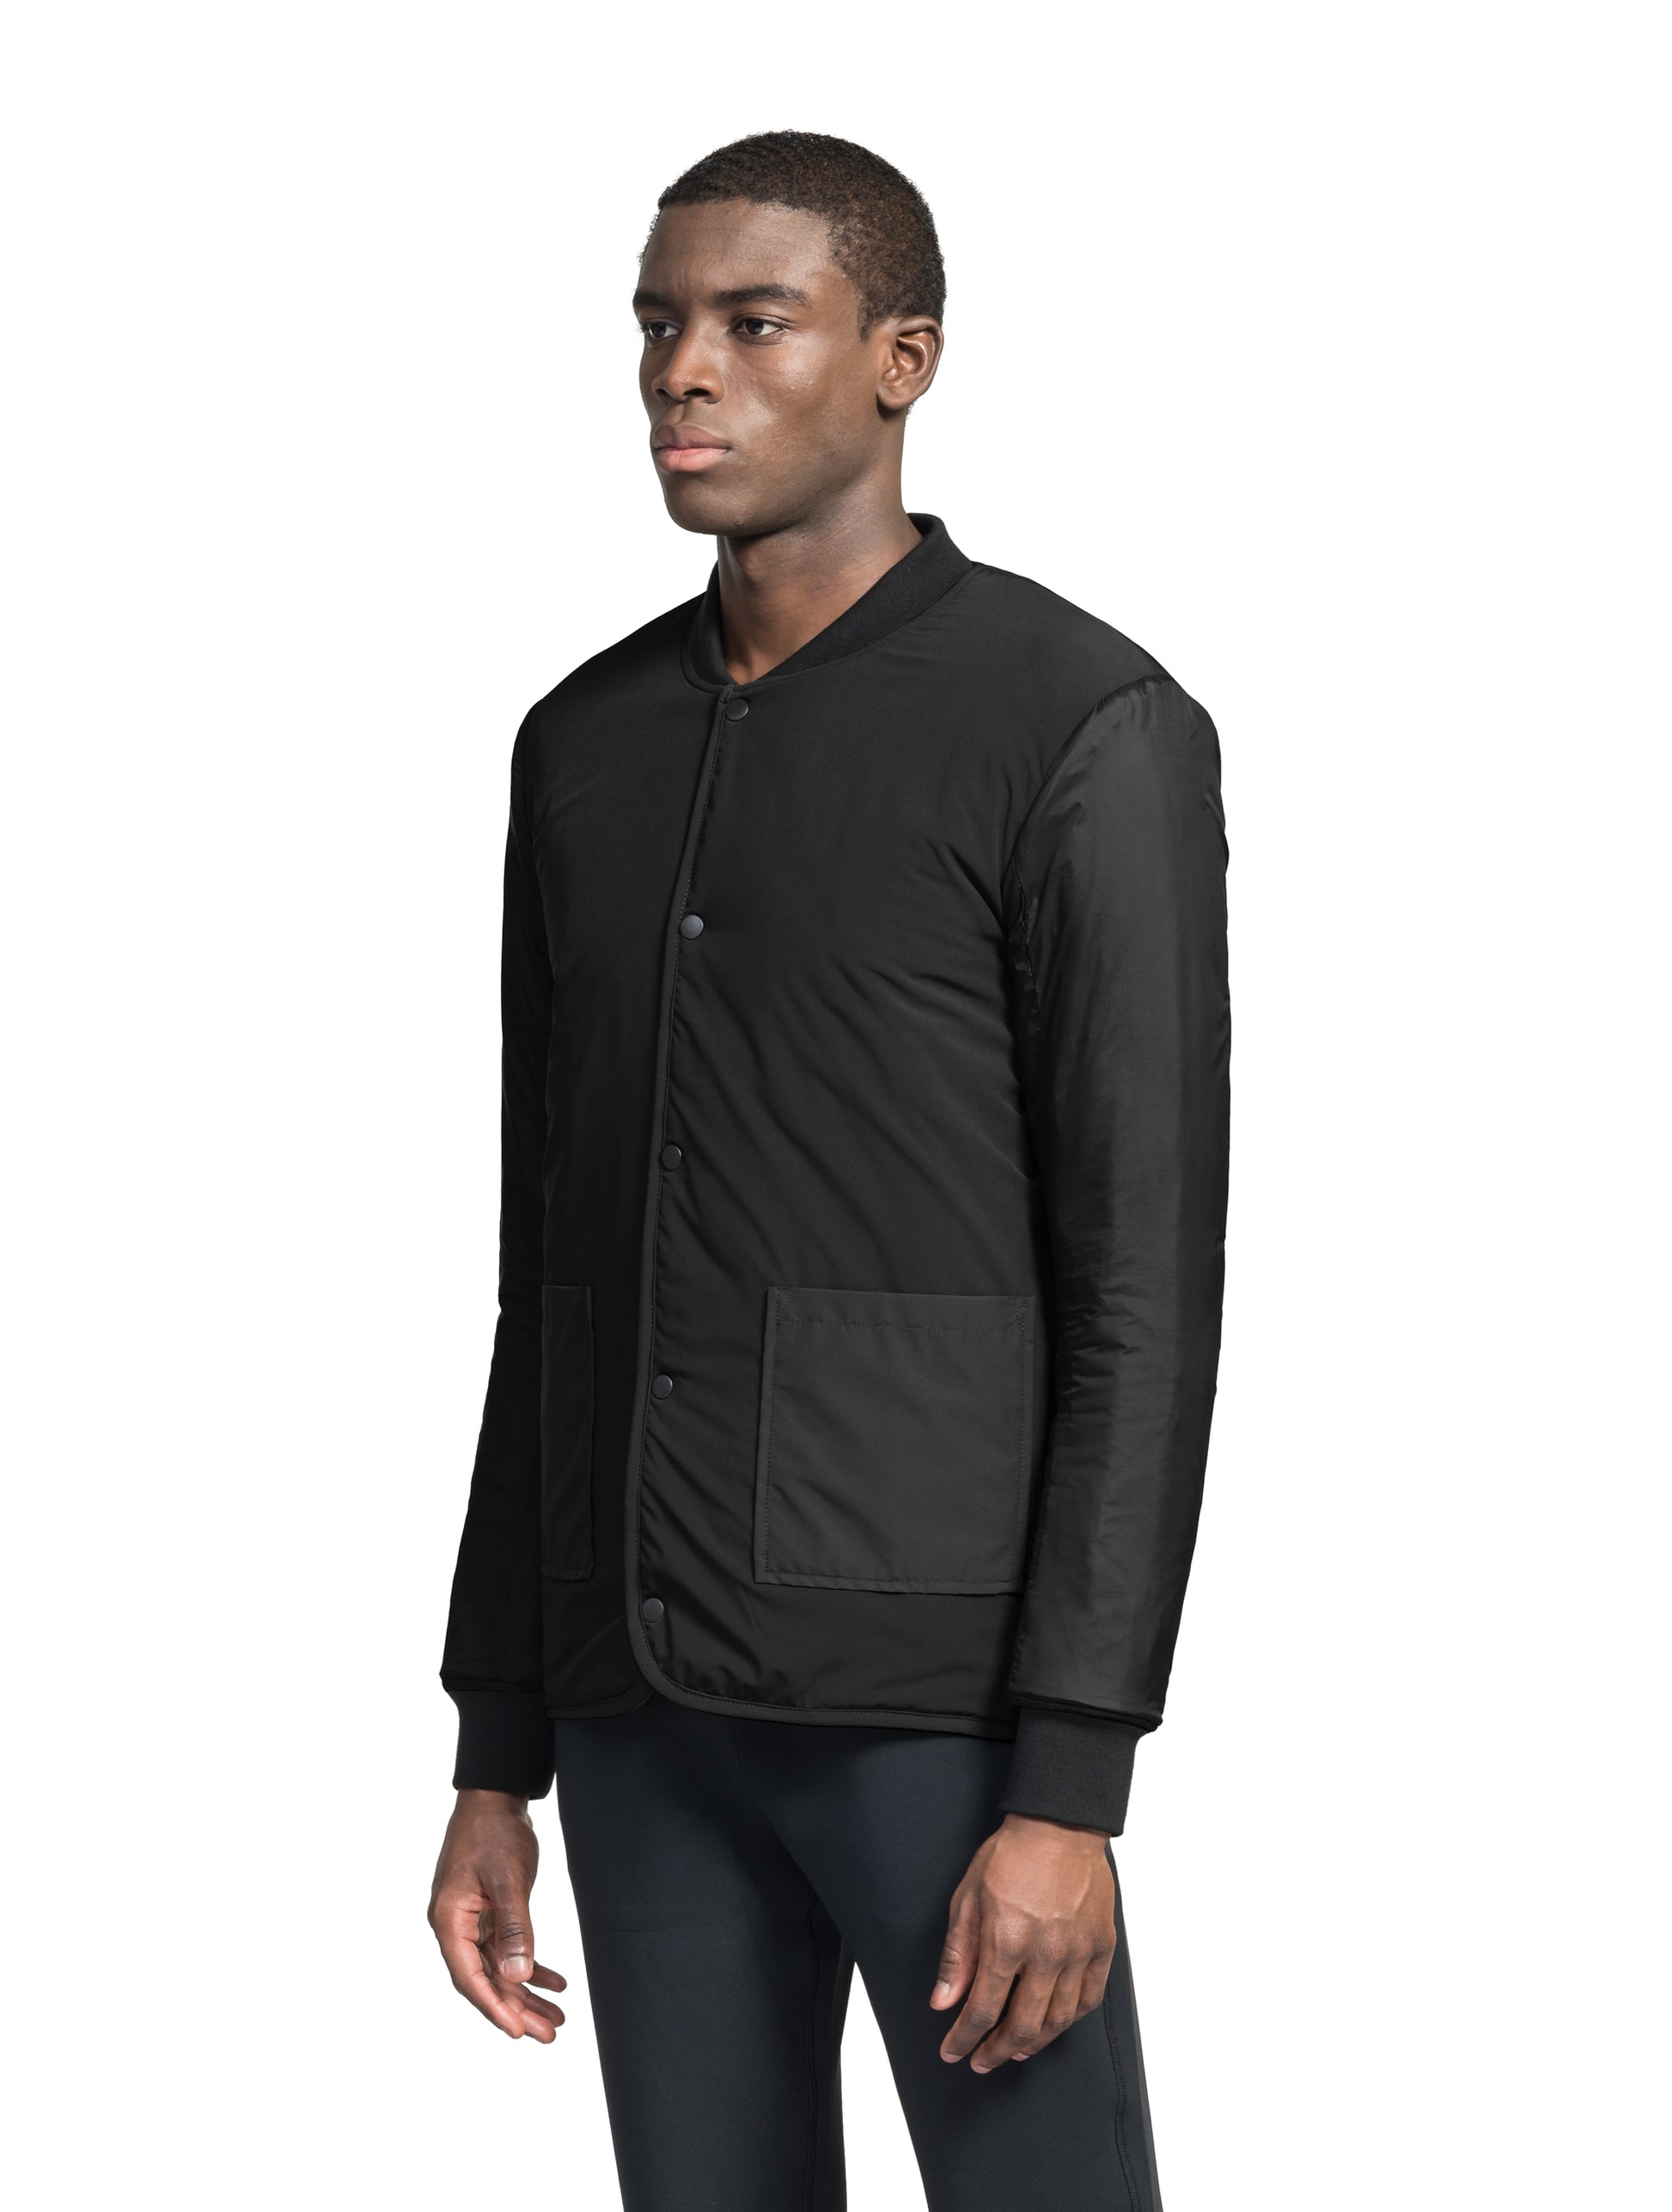 Speck Men's Tailored Mid Layer Jacket in hip length, Primaloft Gold Insulation Active+, diamond quilted body, rib knit collar and cuffs, snap buton front closure, and hidden side-entry zipper pockets at waist, in Black